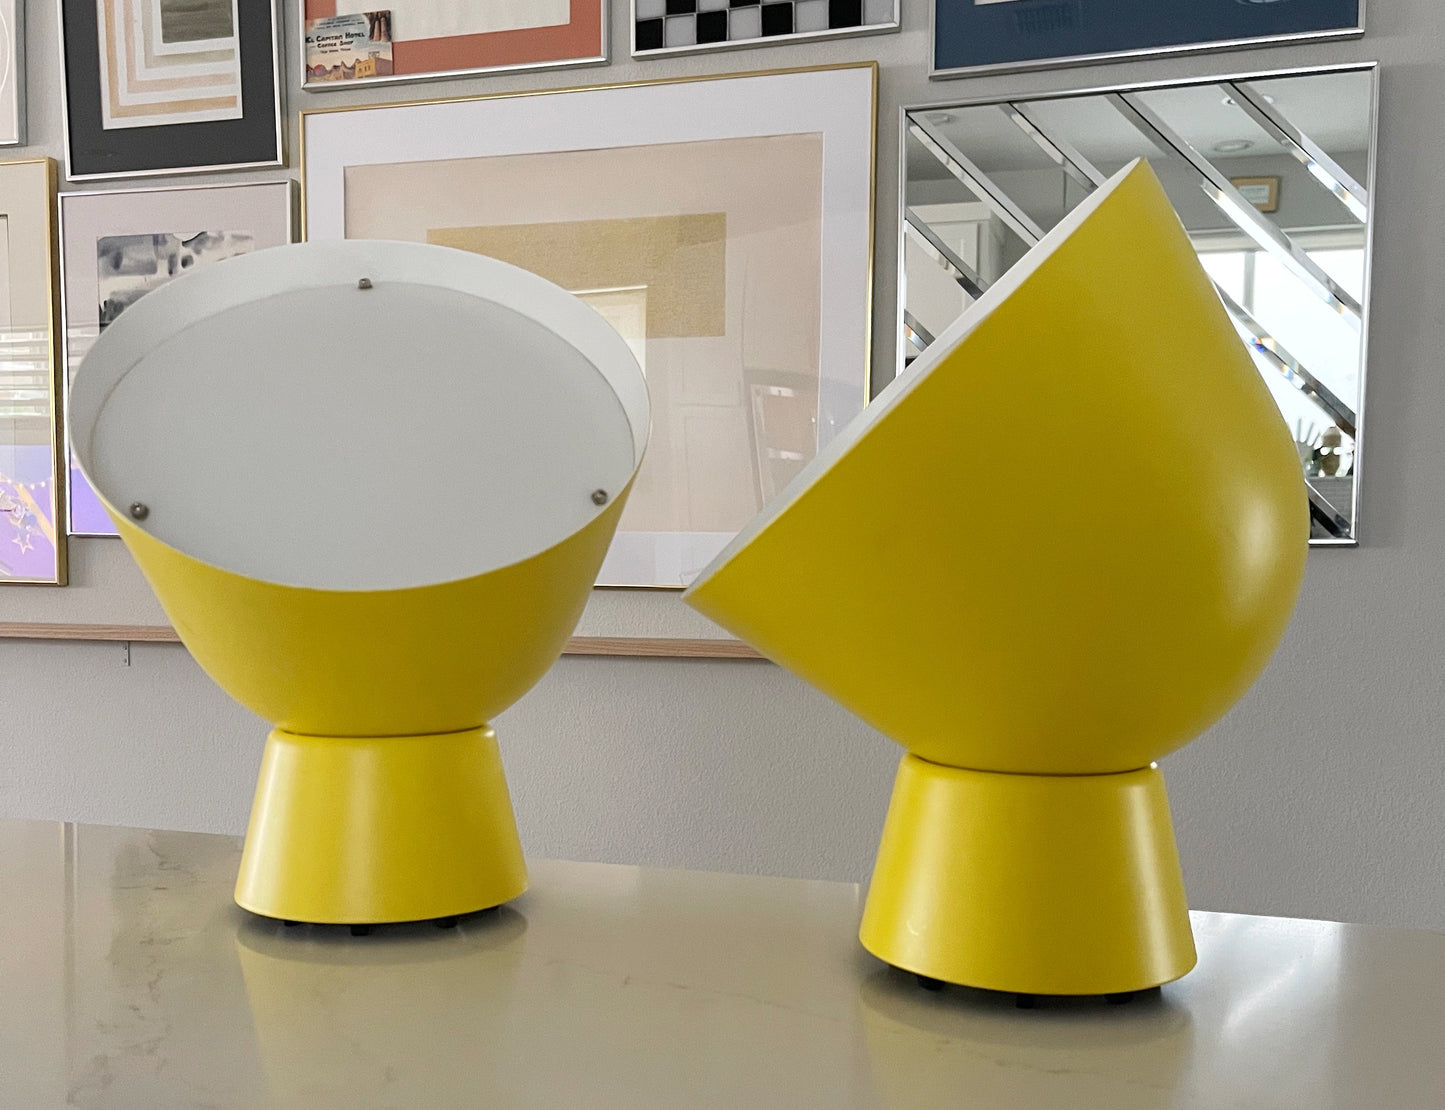 Pair of Yellow Table/Wall Lamps by Designer Ola WIHLBORG for IKEA